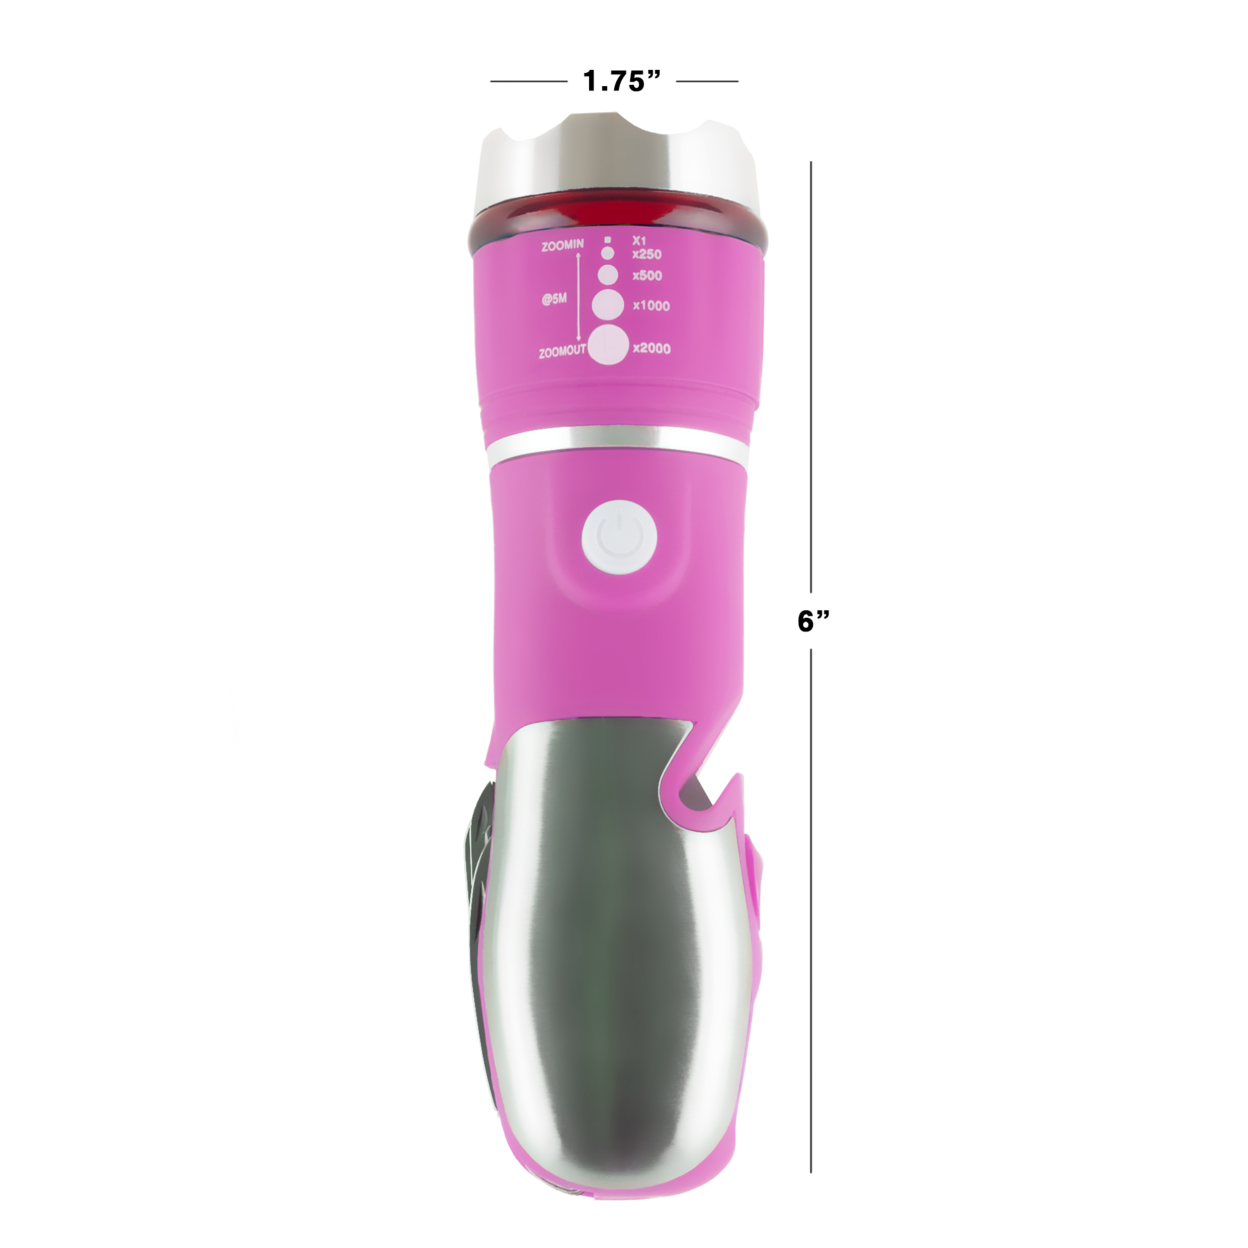 Stalwart 12 In 1 Emergency Safety Multi Tool And LED Flashlight - PINK